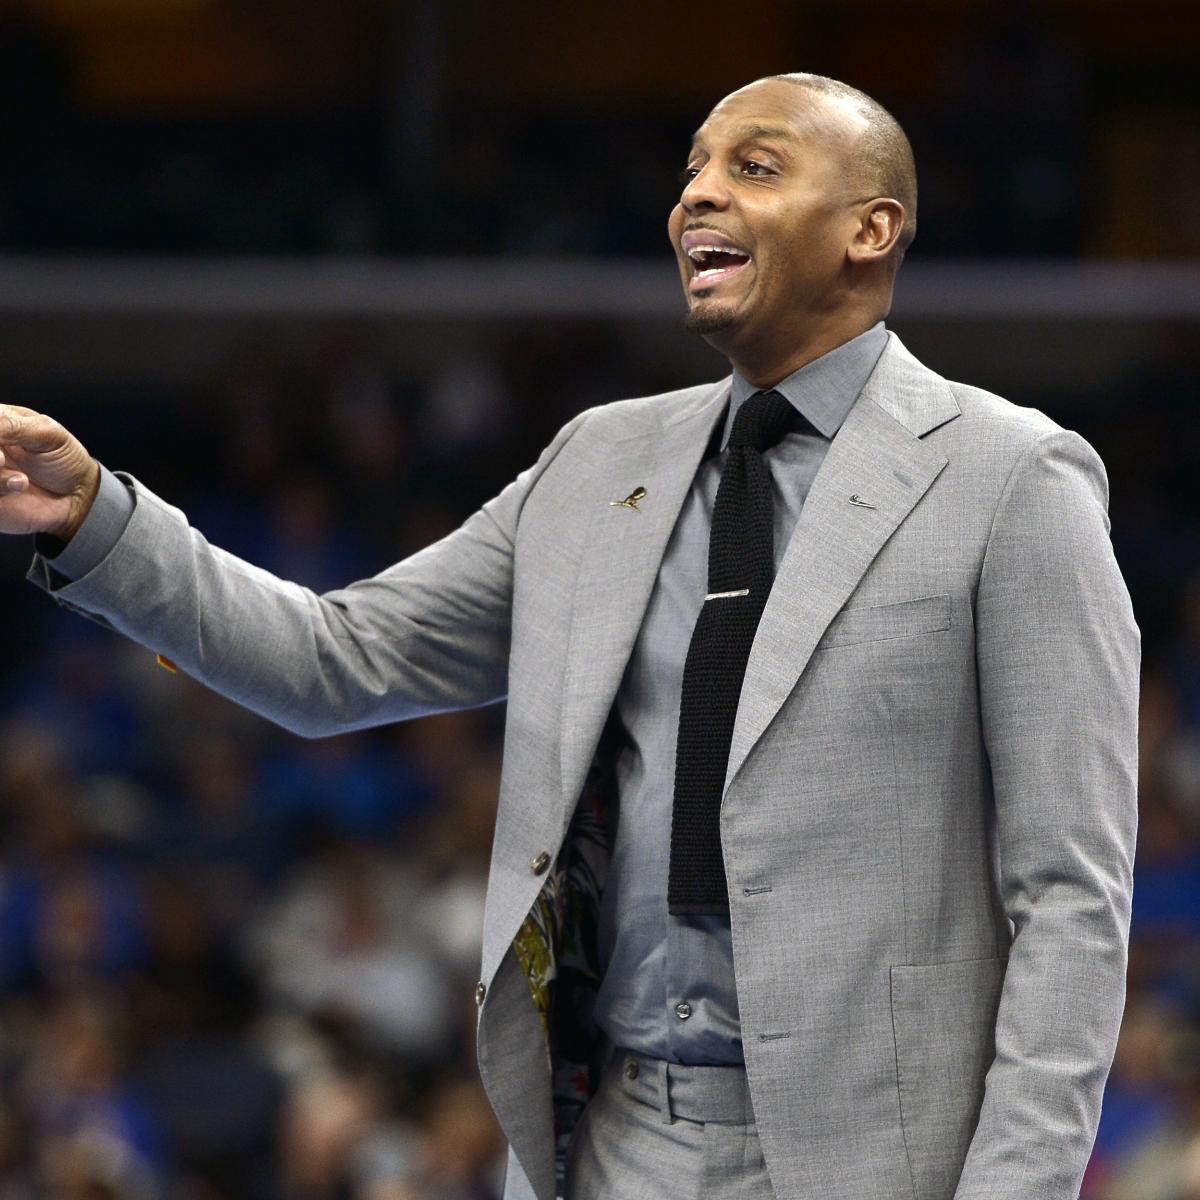 Memphis AD: Penny Hardaway's RJ Hampton Workout 'Not in Line' with ...